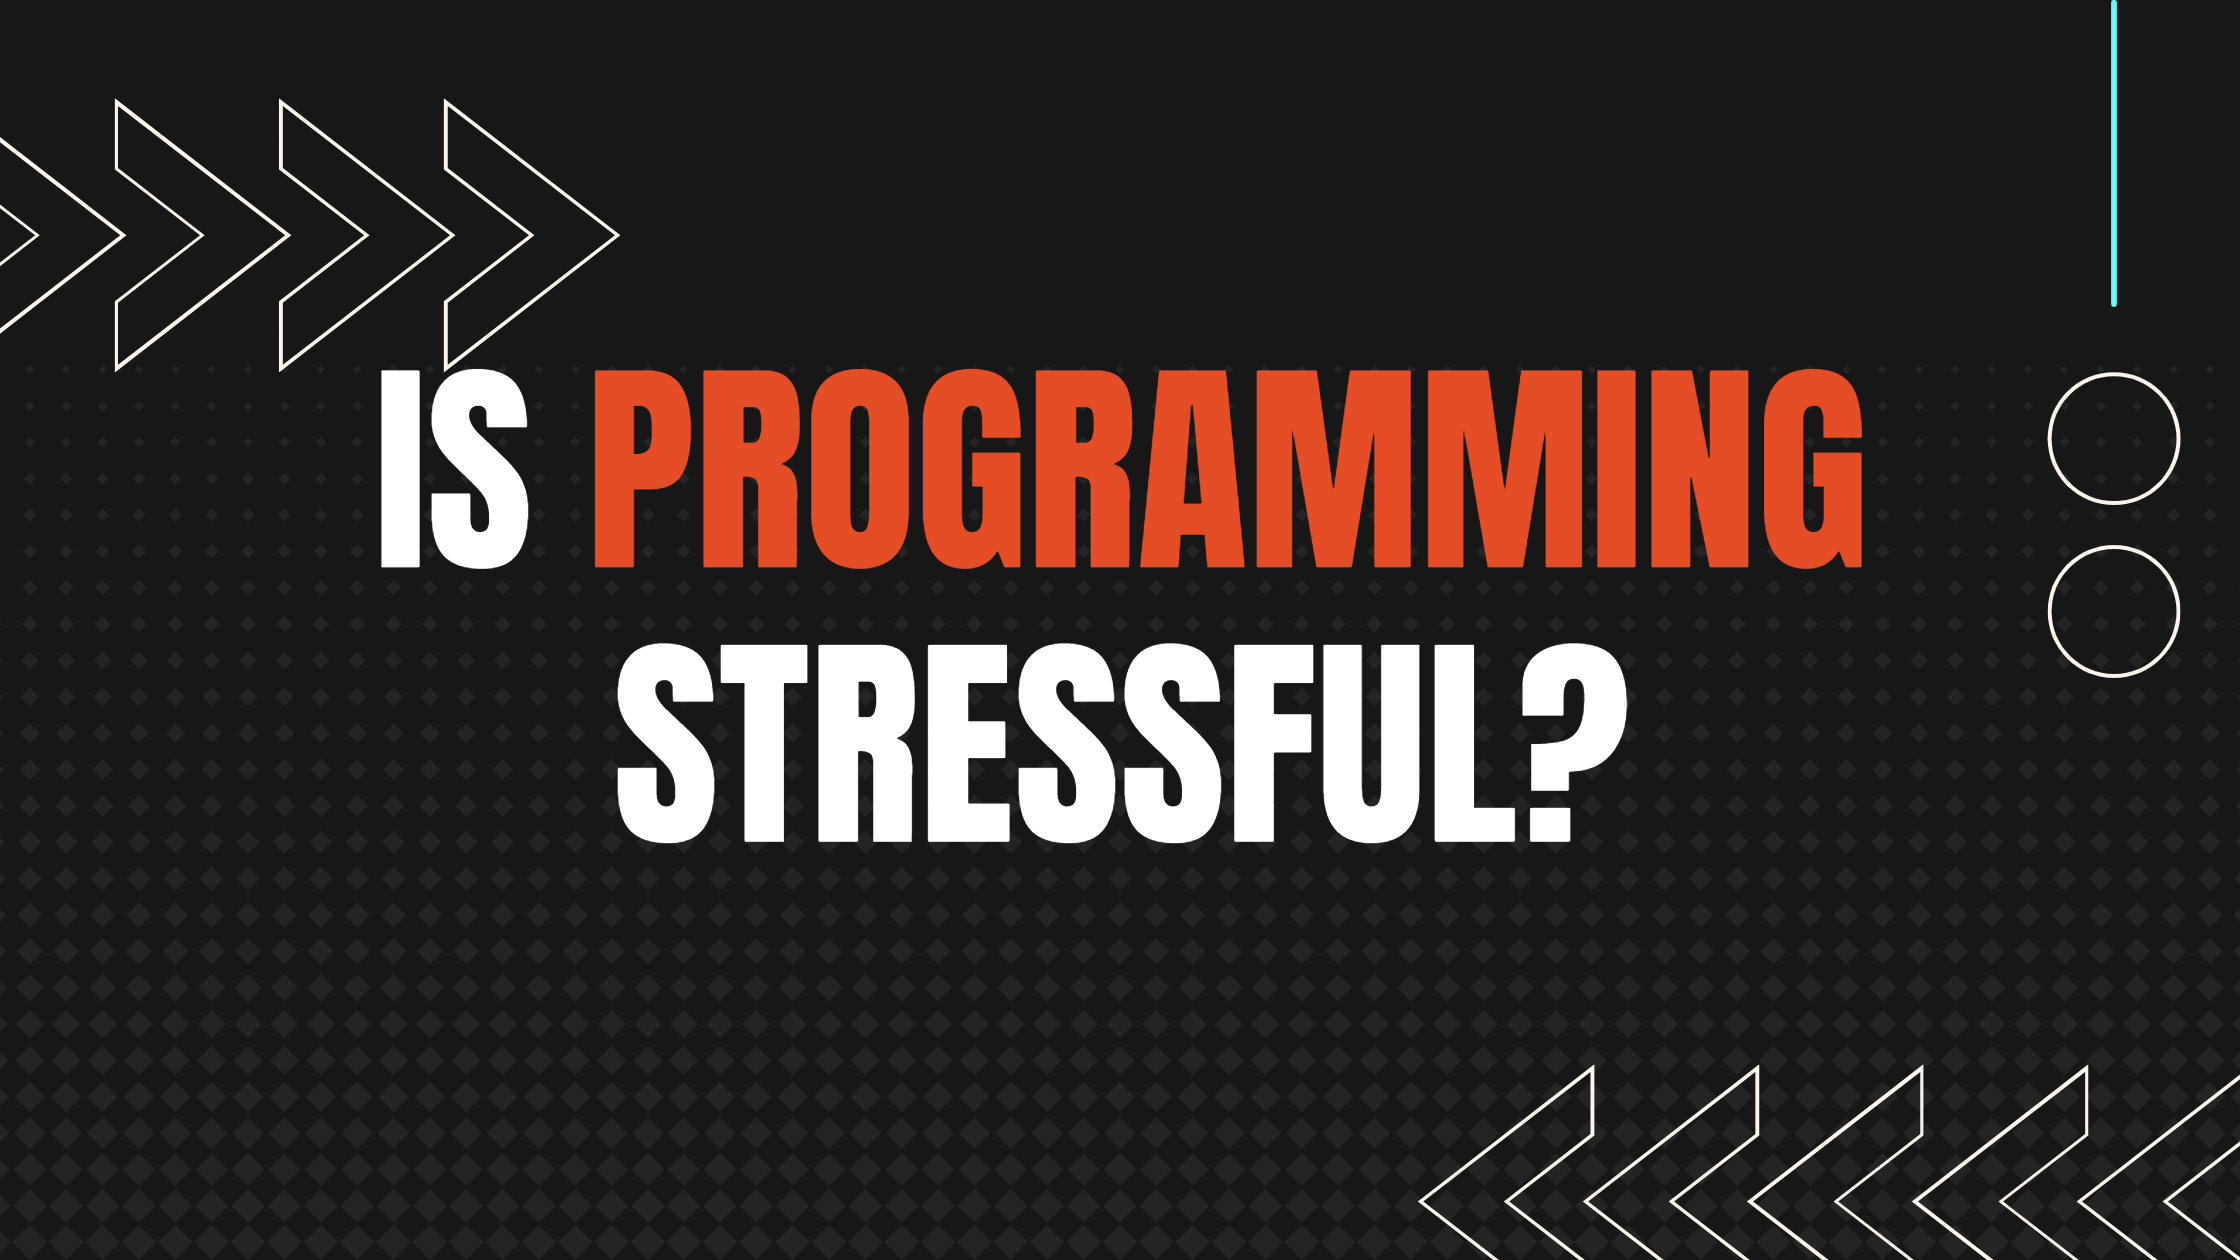 Is programming a stressful career choice?